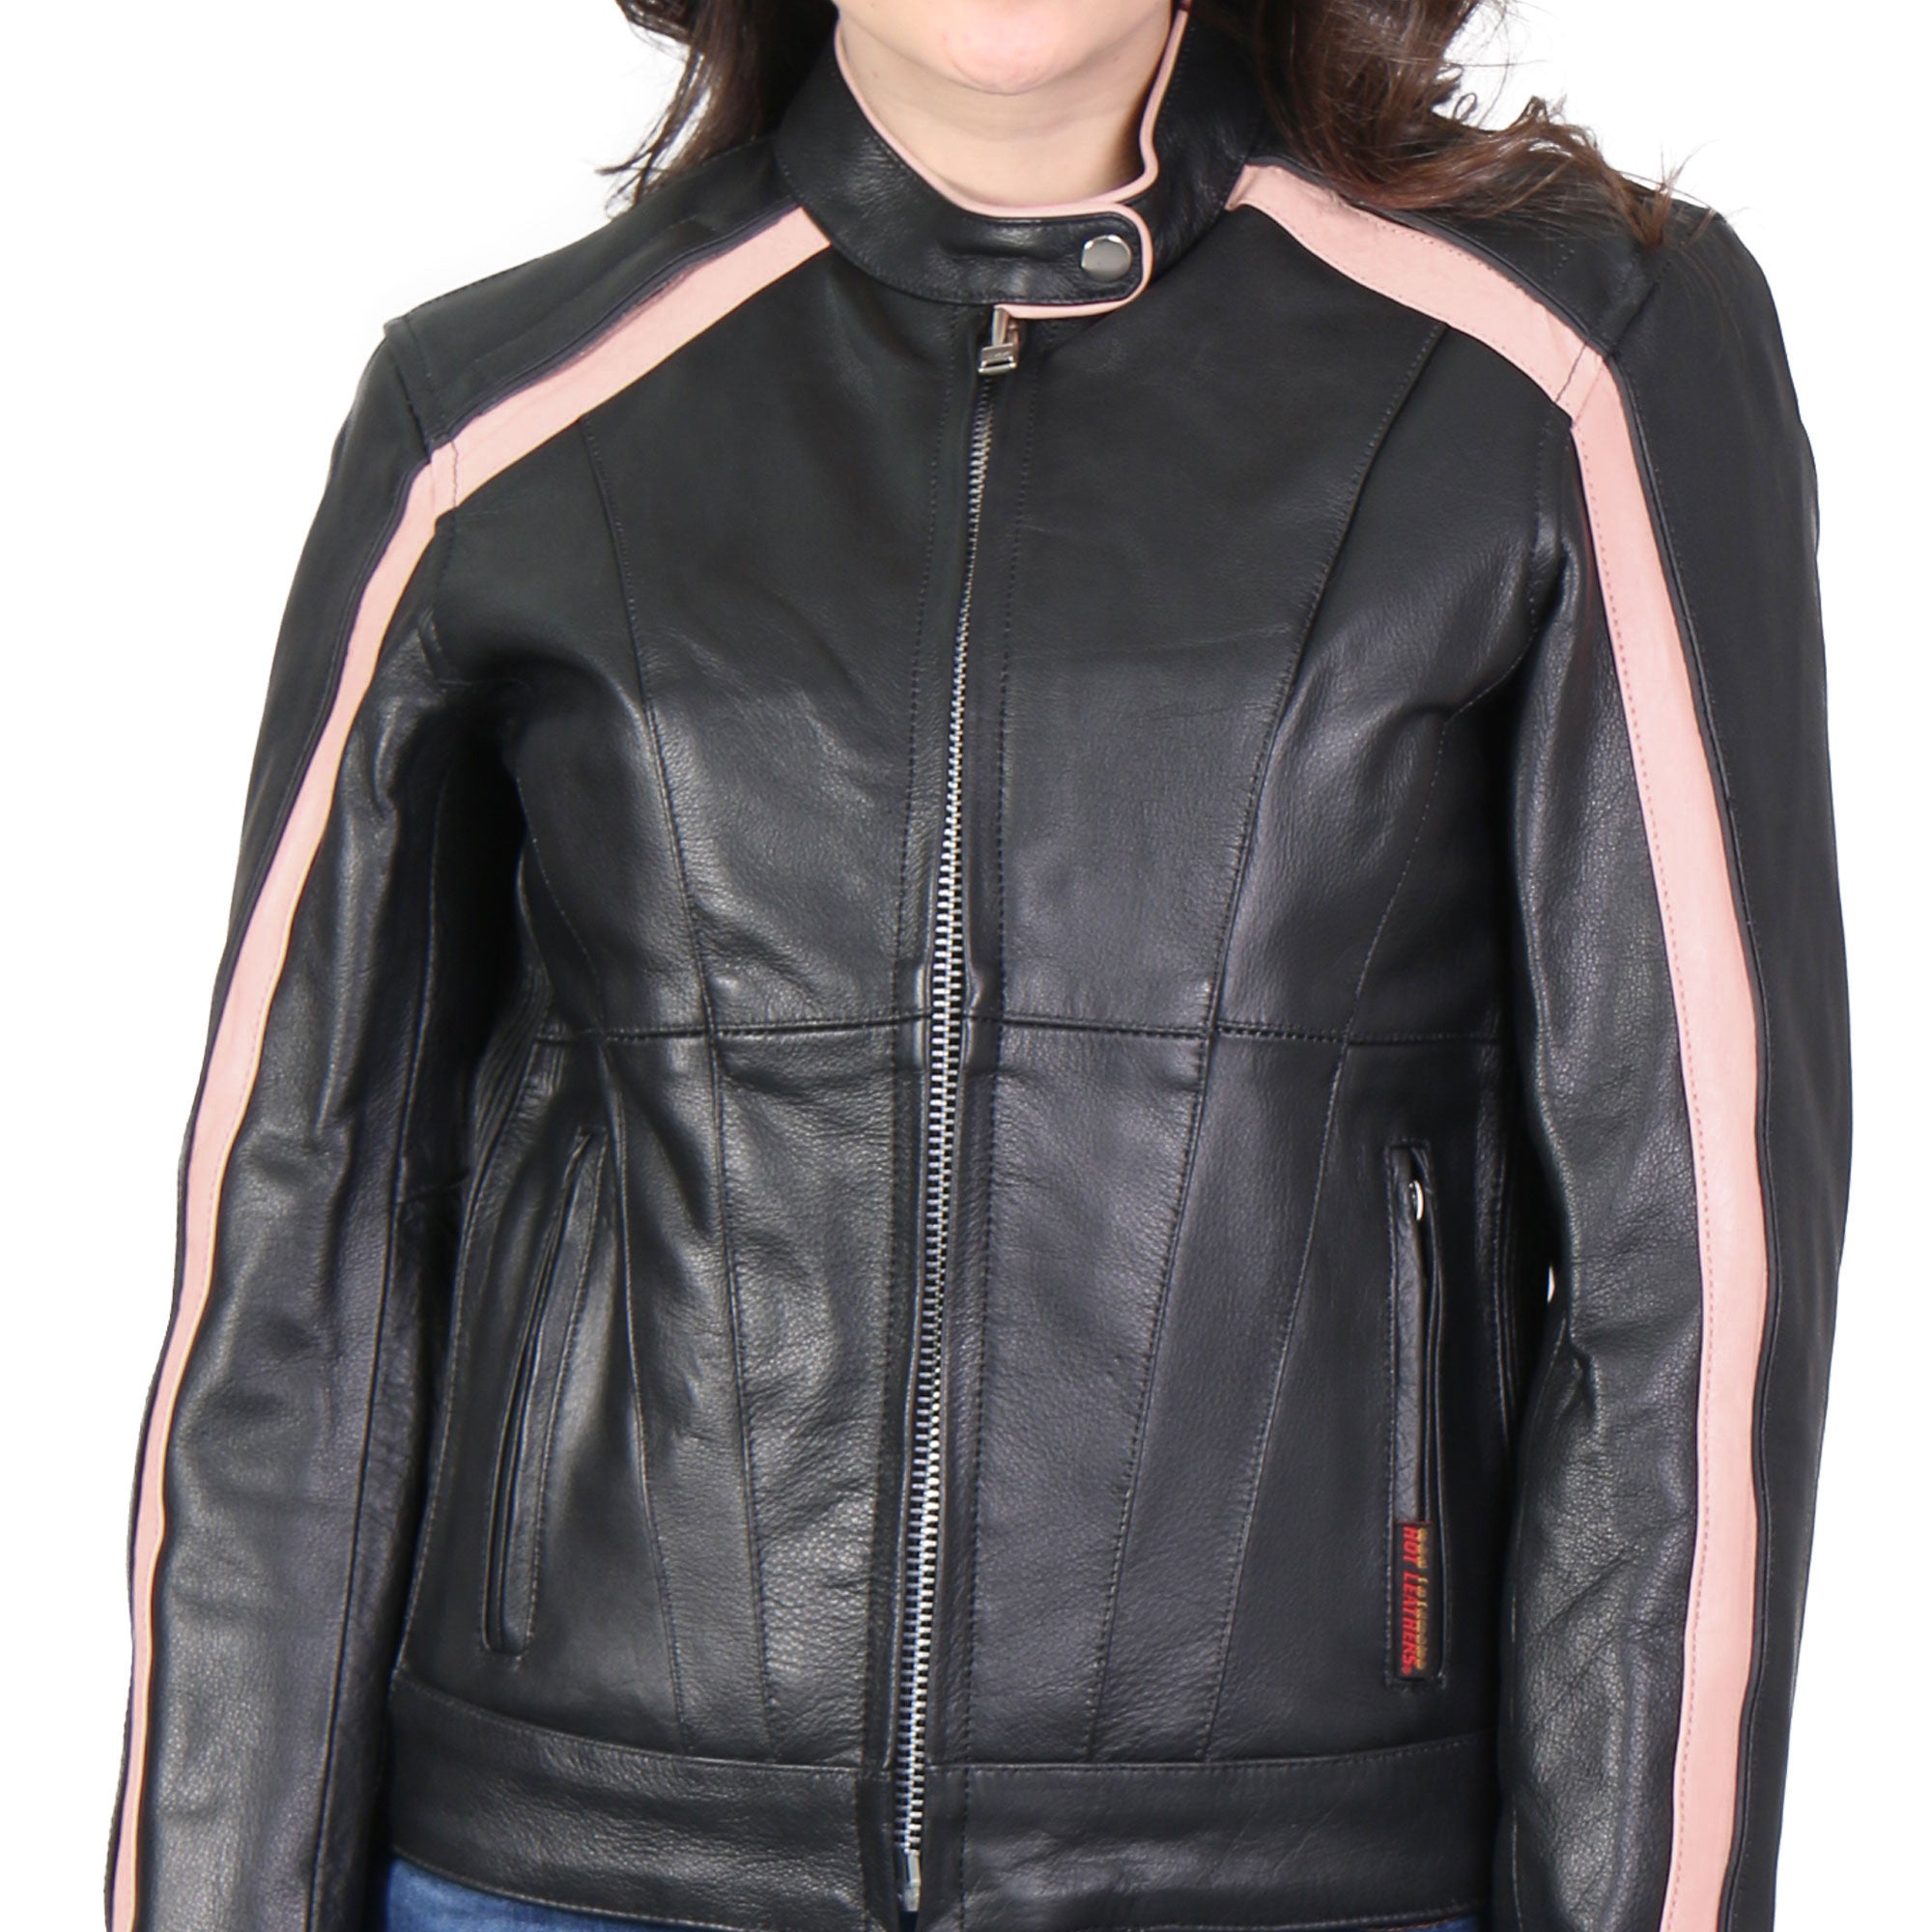 Hot Leathers JKL1022 Pink Striped Motorcycle Leather Biker Jacket with